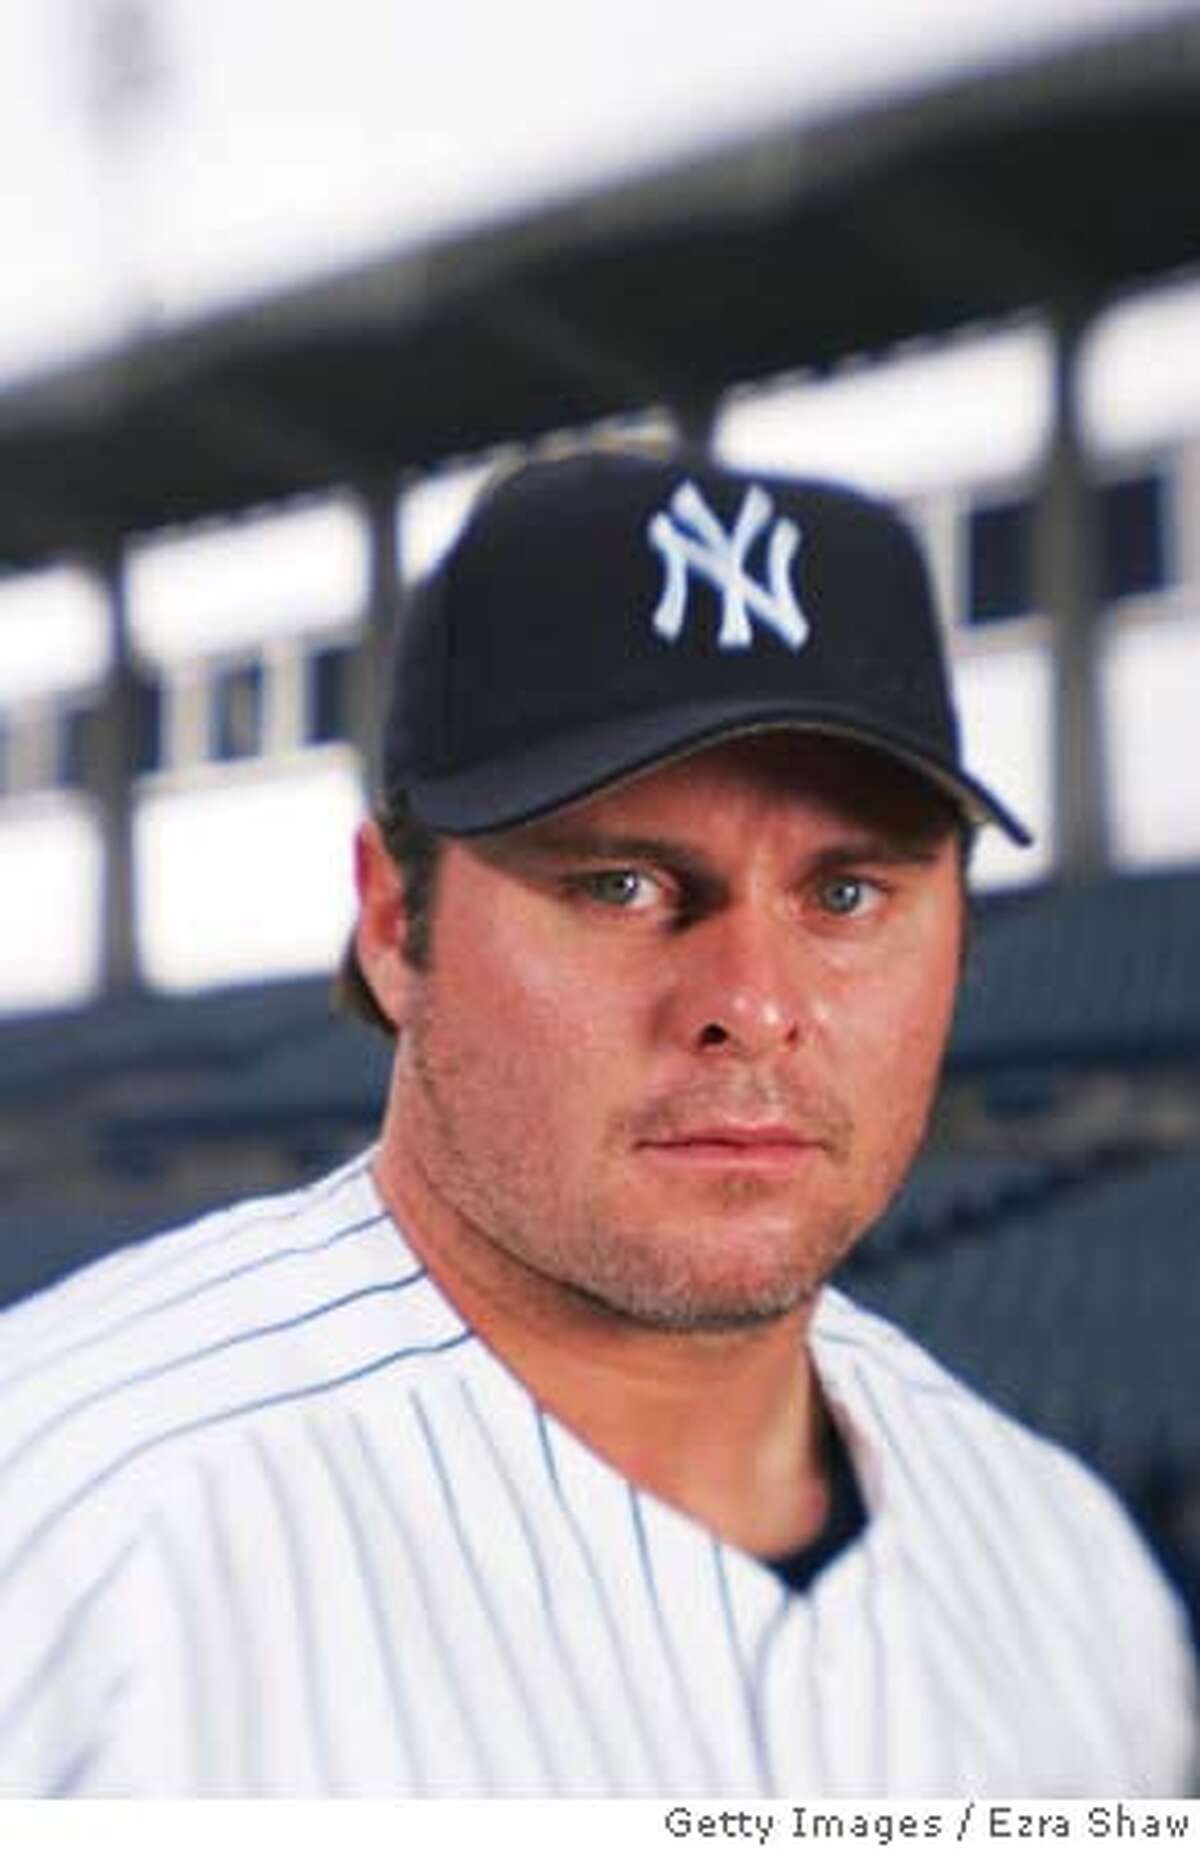 TAMPA, FL - FEBRUARY 25: Jason Giambi #25 of the New York Yankees poses for a portrait during Yankees Photo Day at Legends Field on February 25, 2005 in Tampa, Florida. (Photo by Ezra Shaw/Getty Images) *** Local Caption *** Jason Giambi